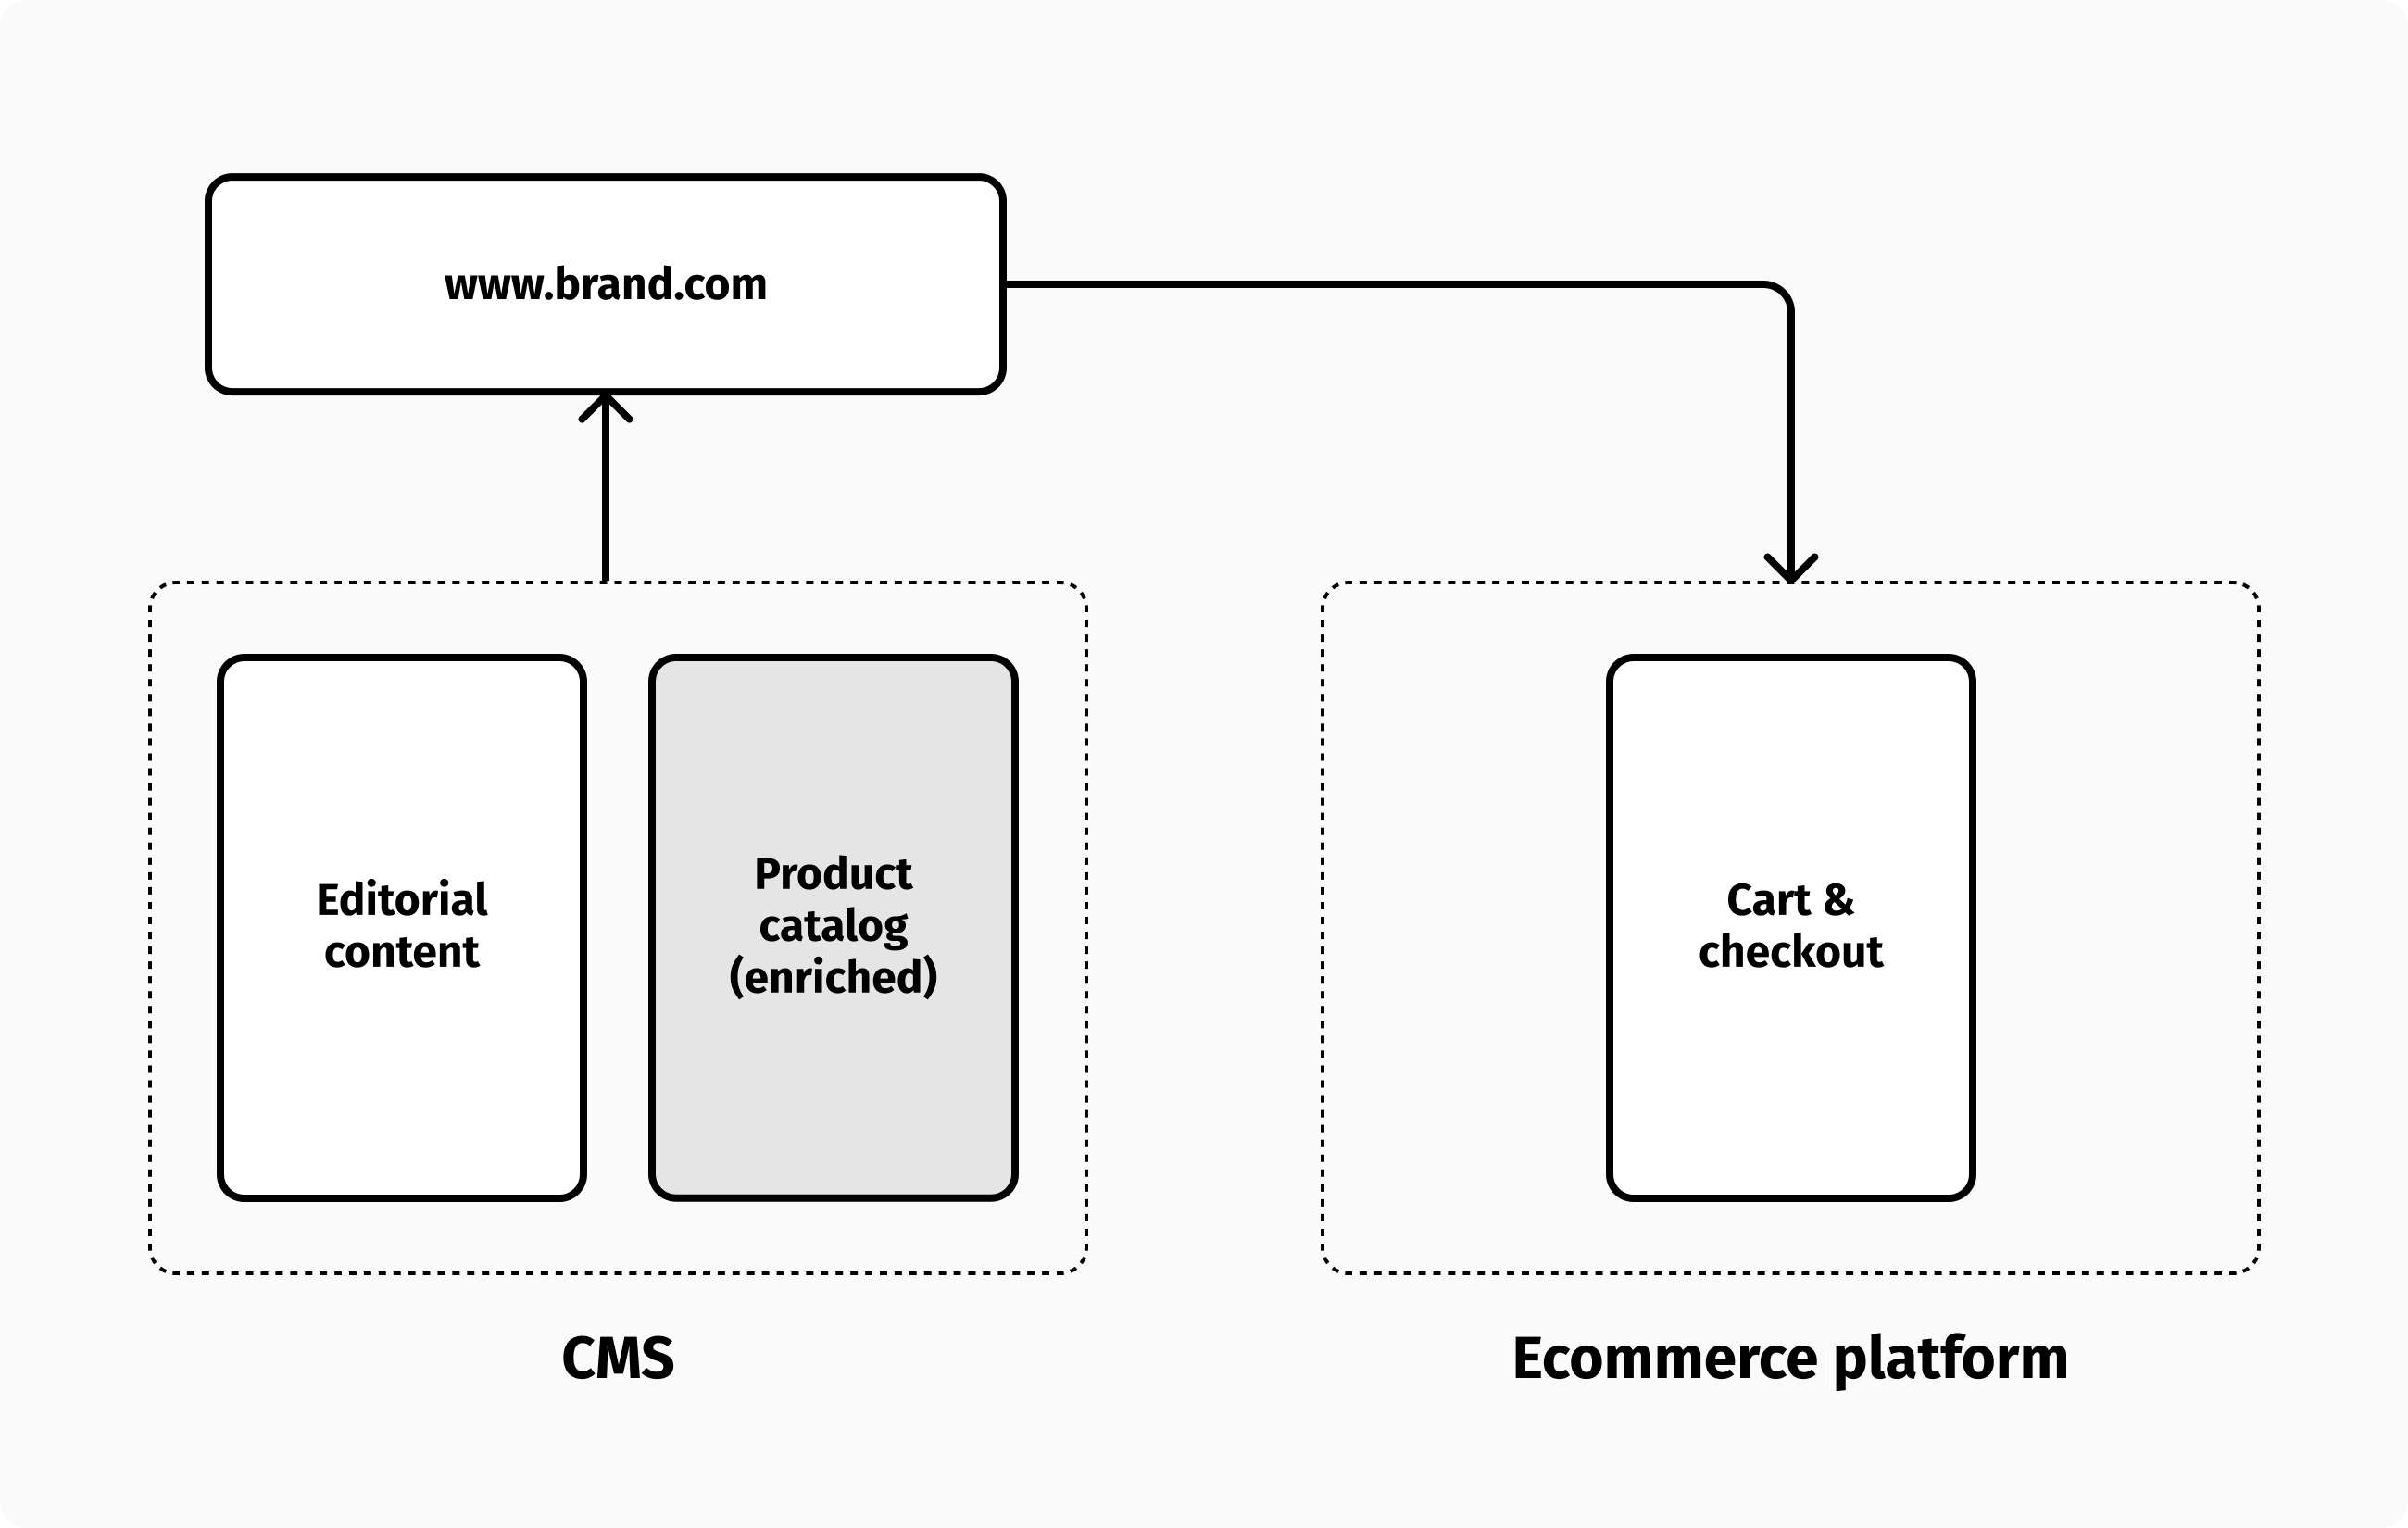 Product catalogs belong to the content domain, not commerce.